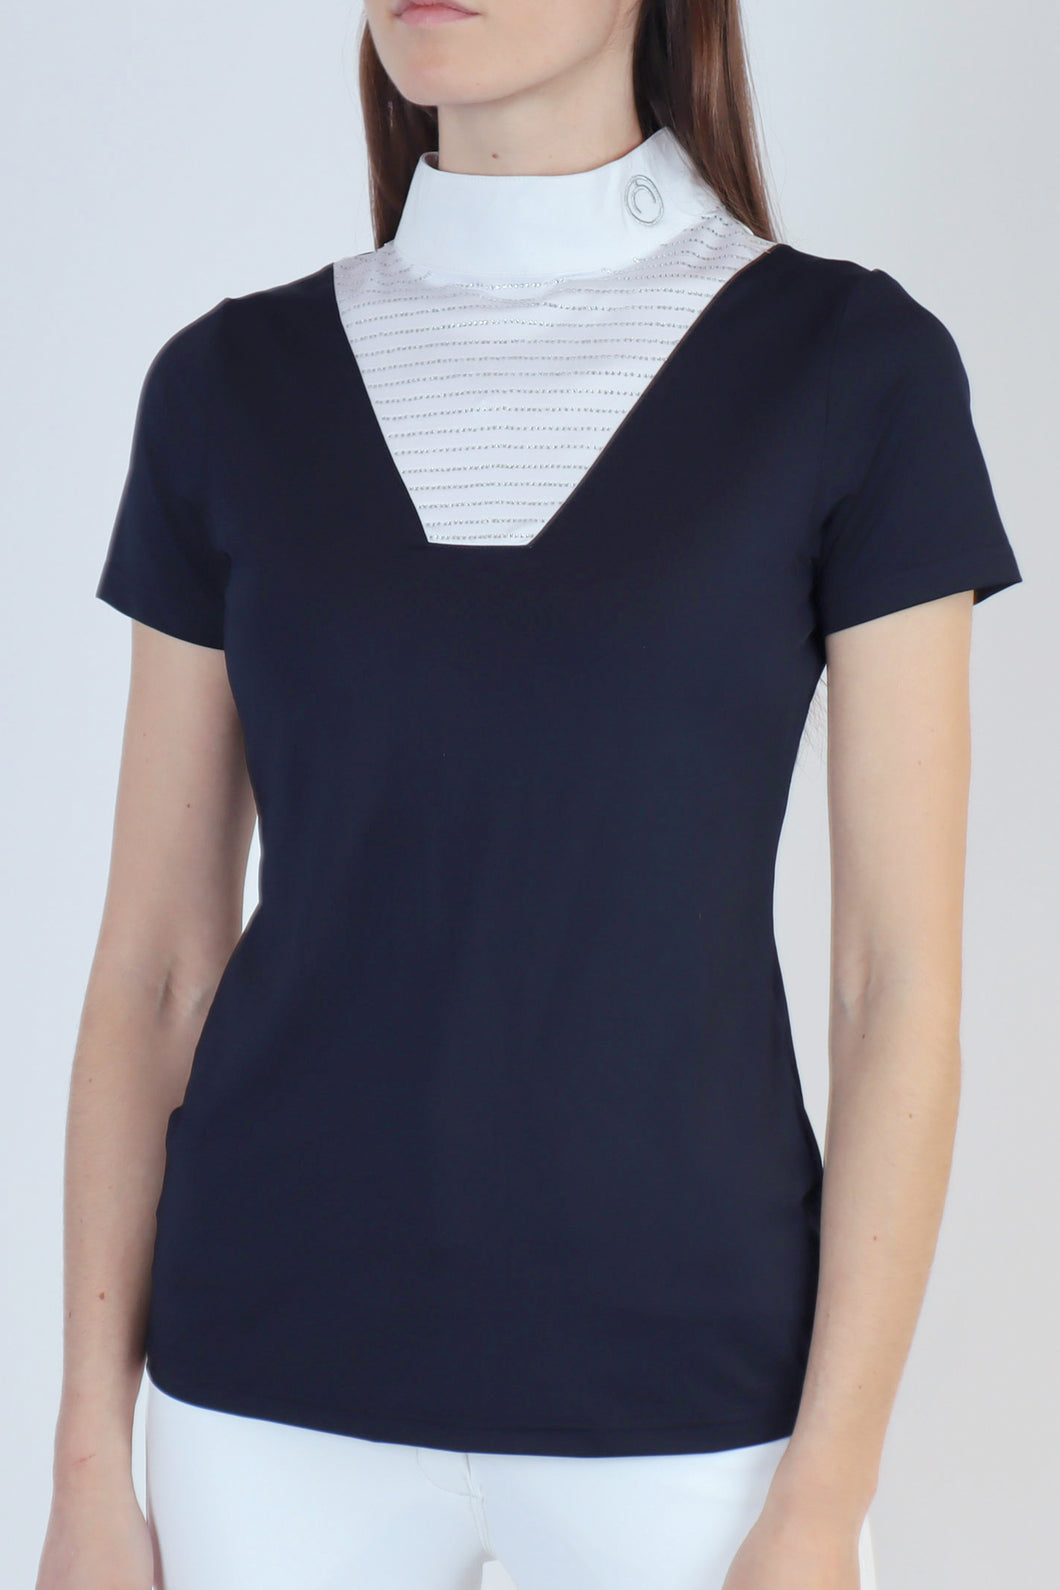 Clare Crystal Competition Shirt - Navy